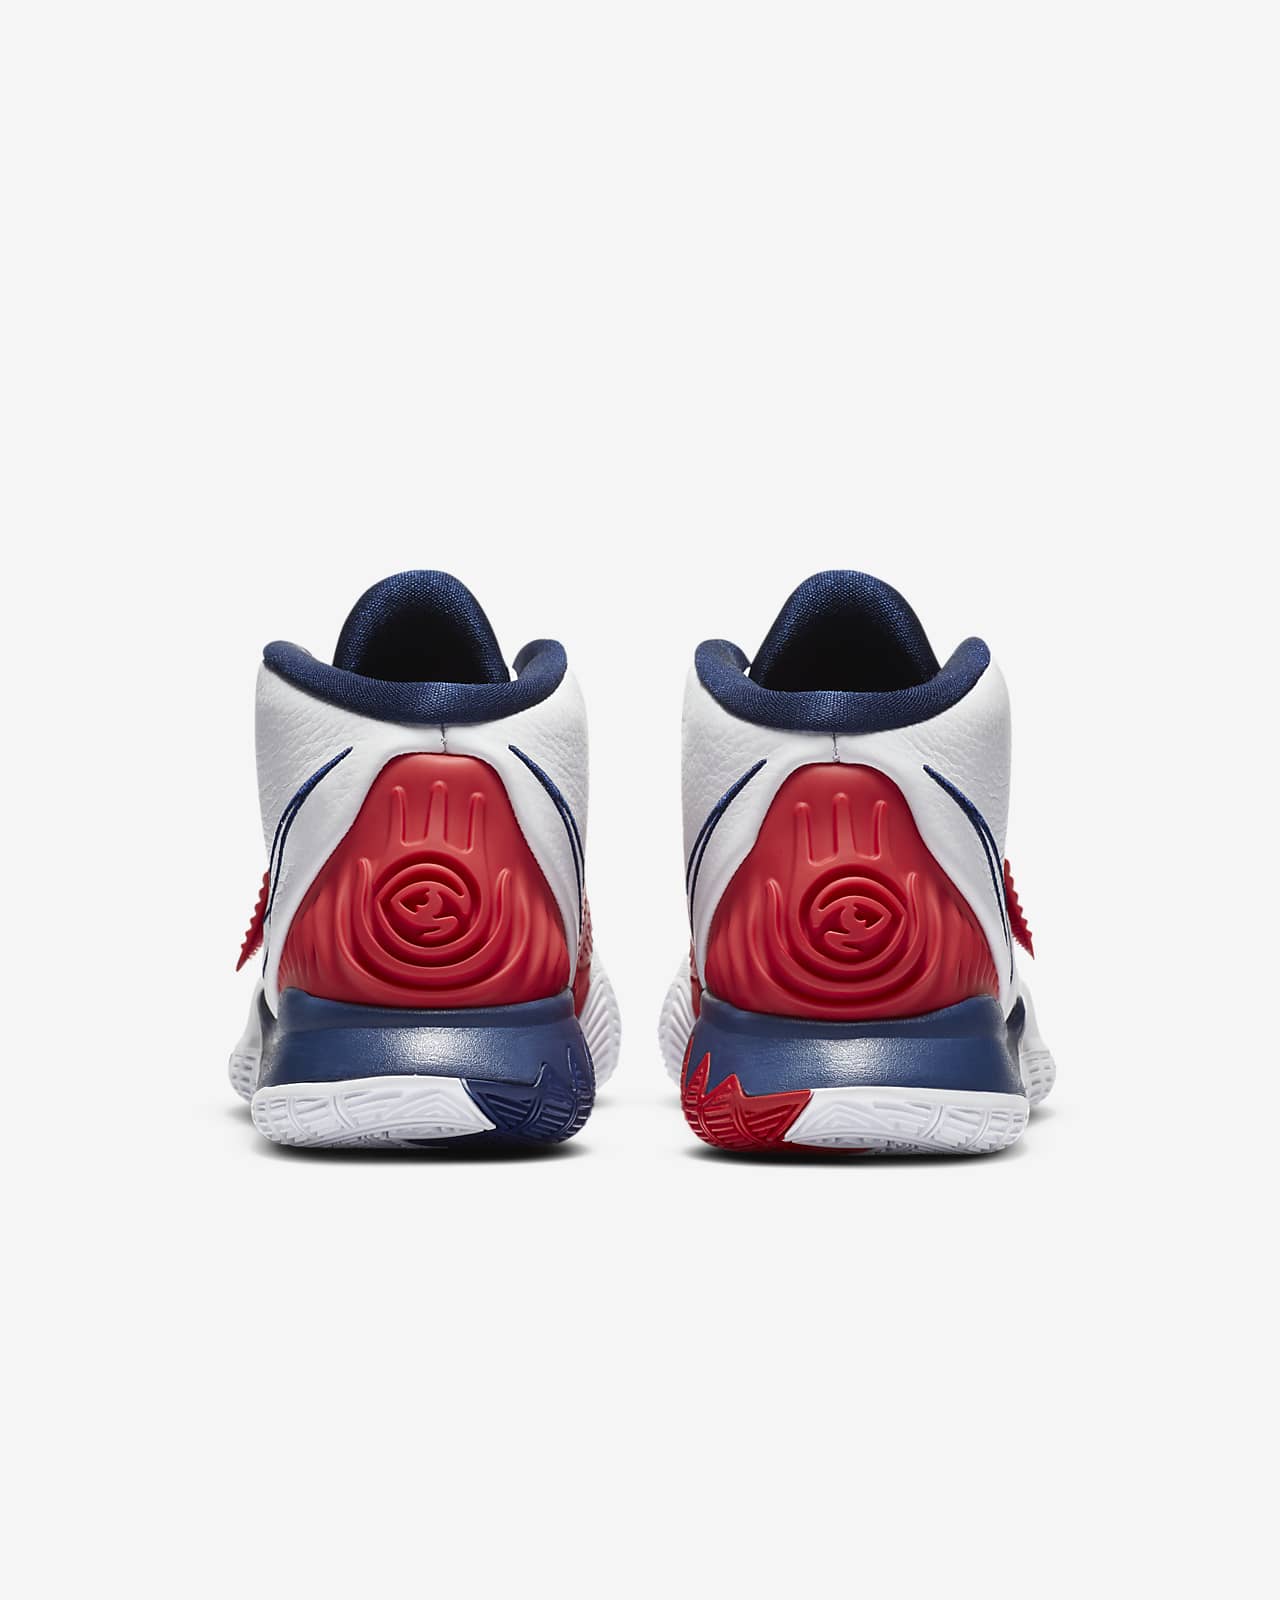  Nai Shoes Carrying Kyrie 6 GS Amazon